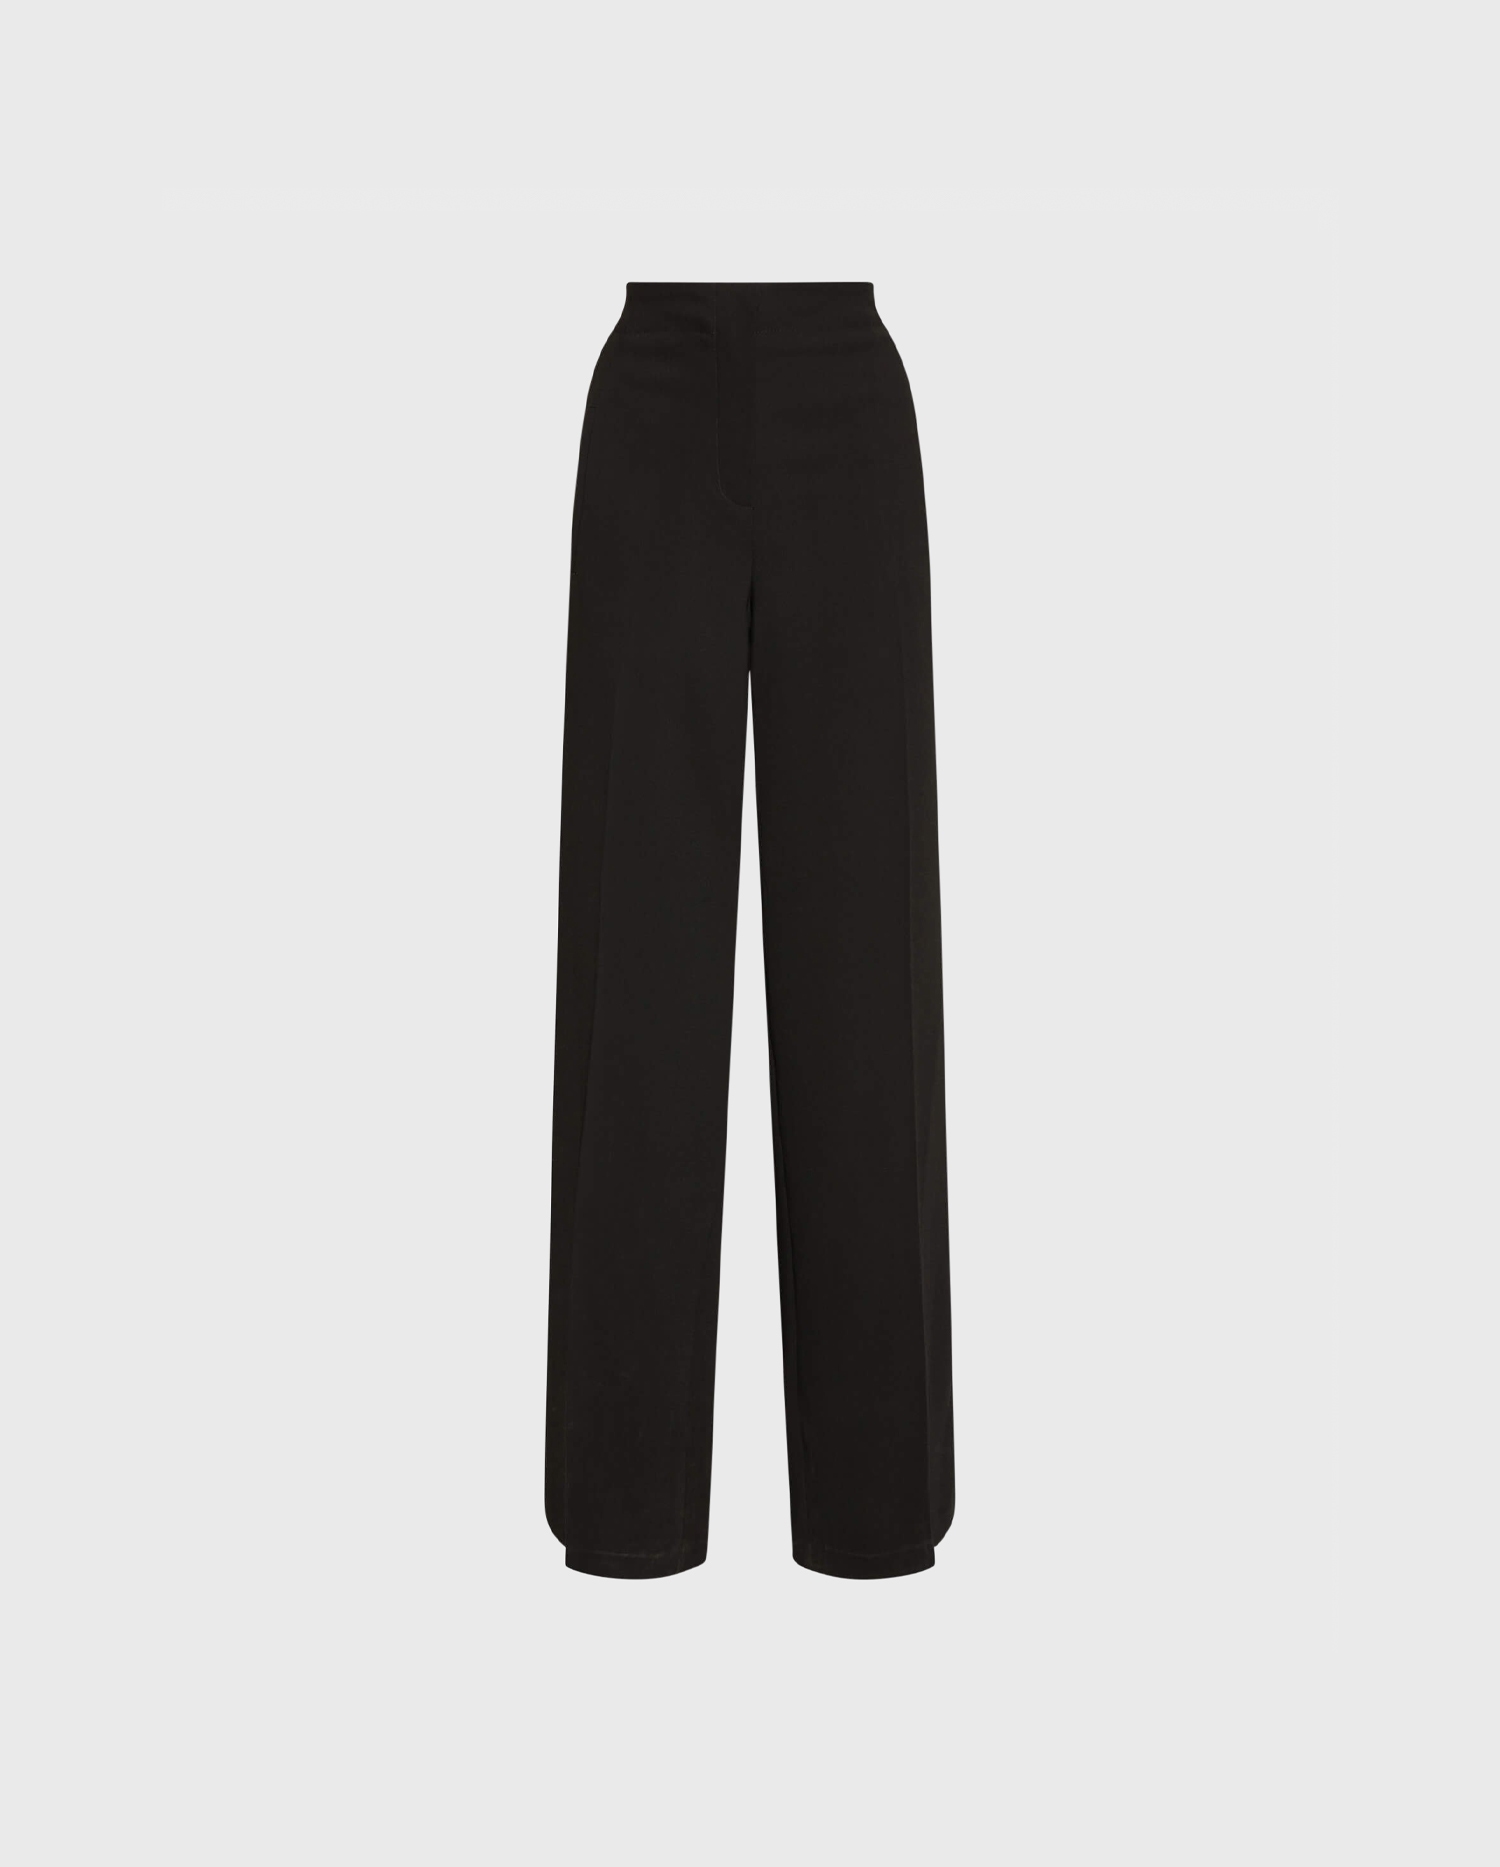 Discover The ARGAN Black Maxi Trousers in Fluid Crepe